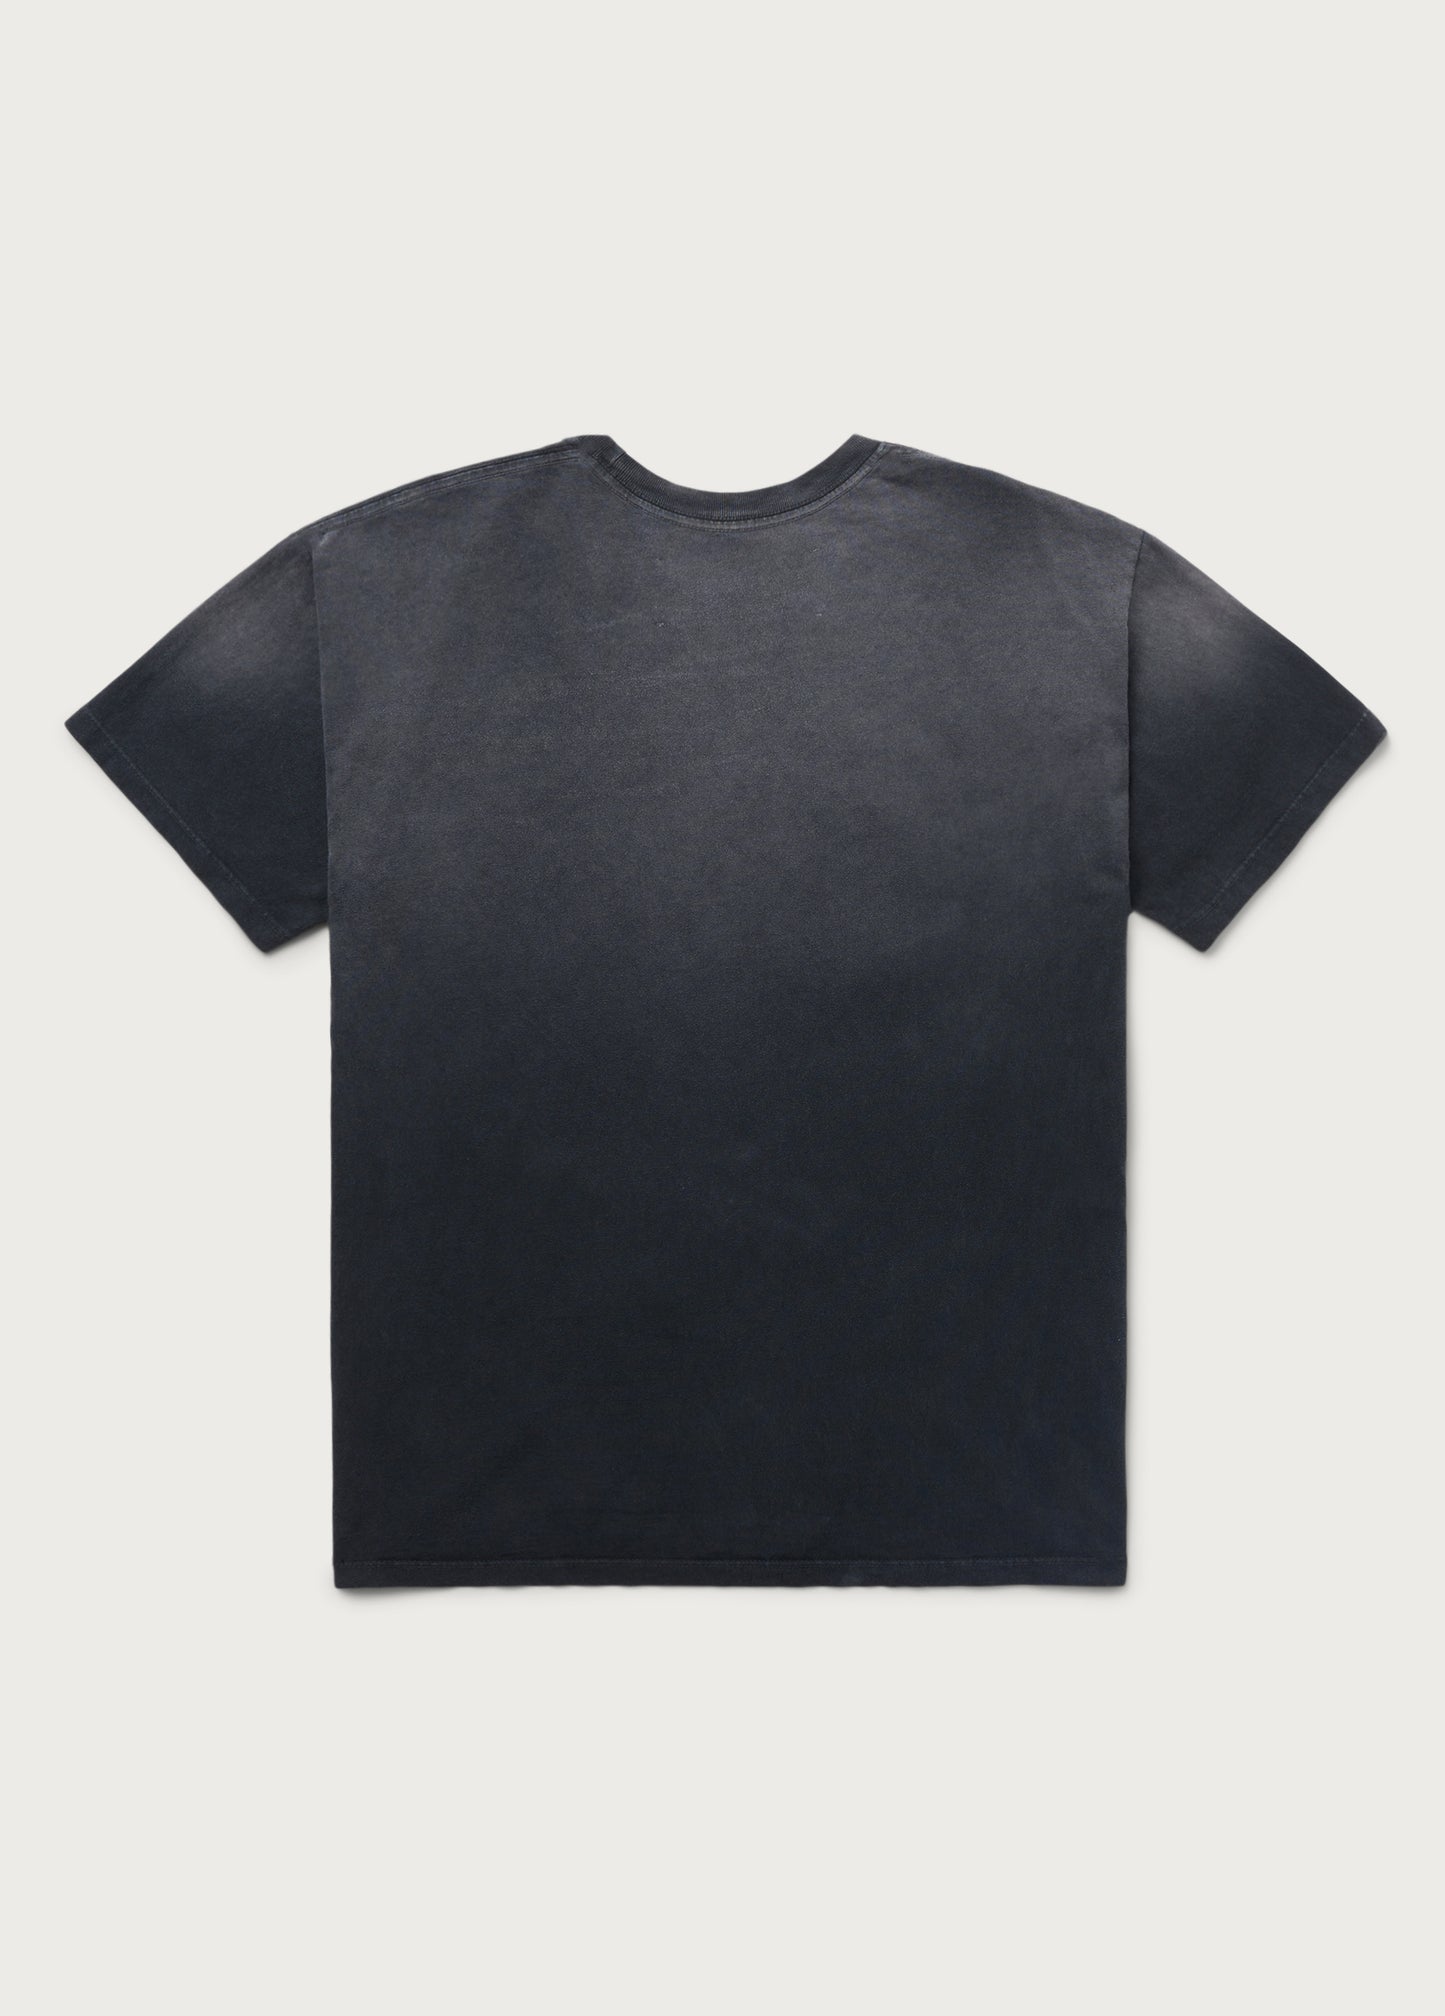 Just For A Visit Tee | Black